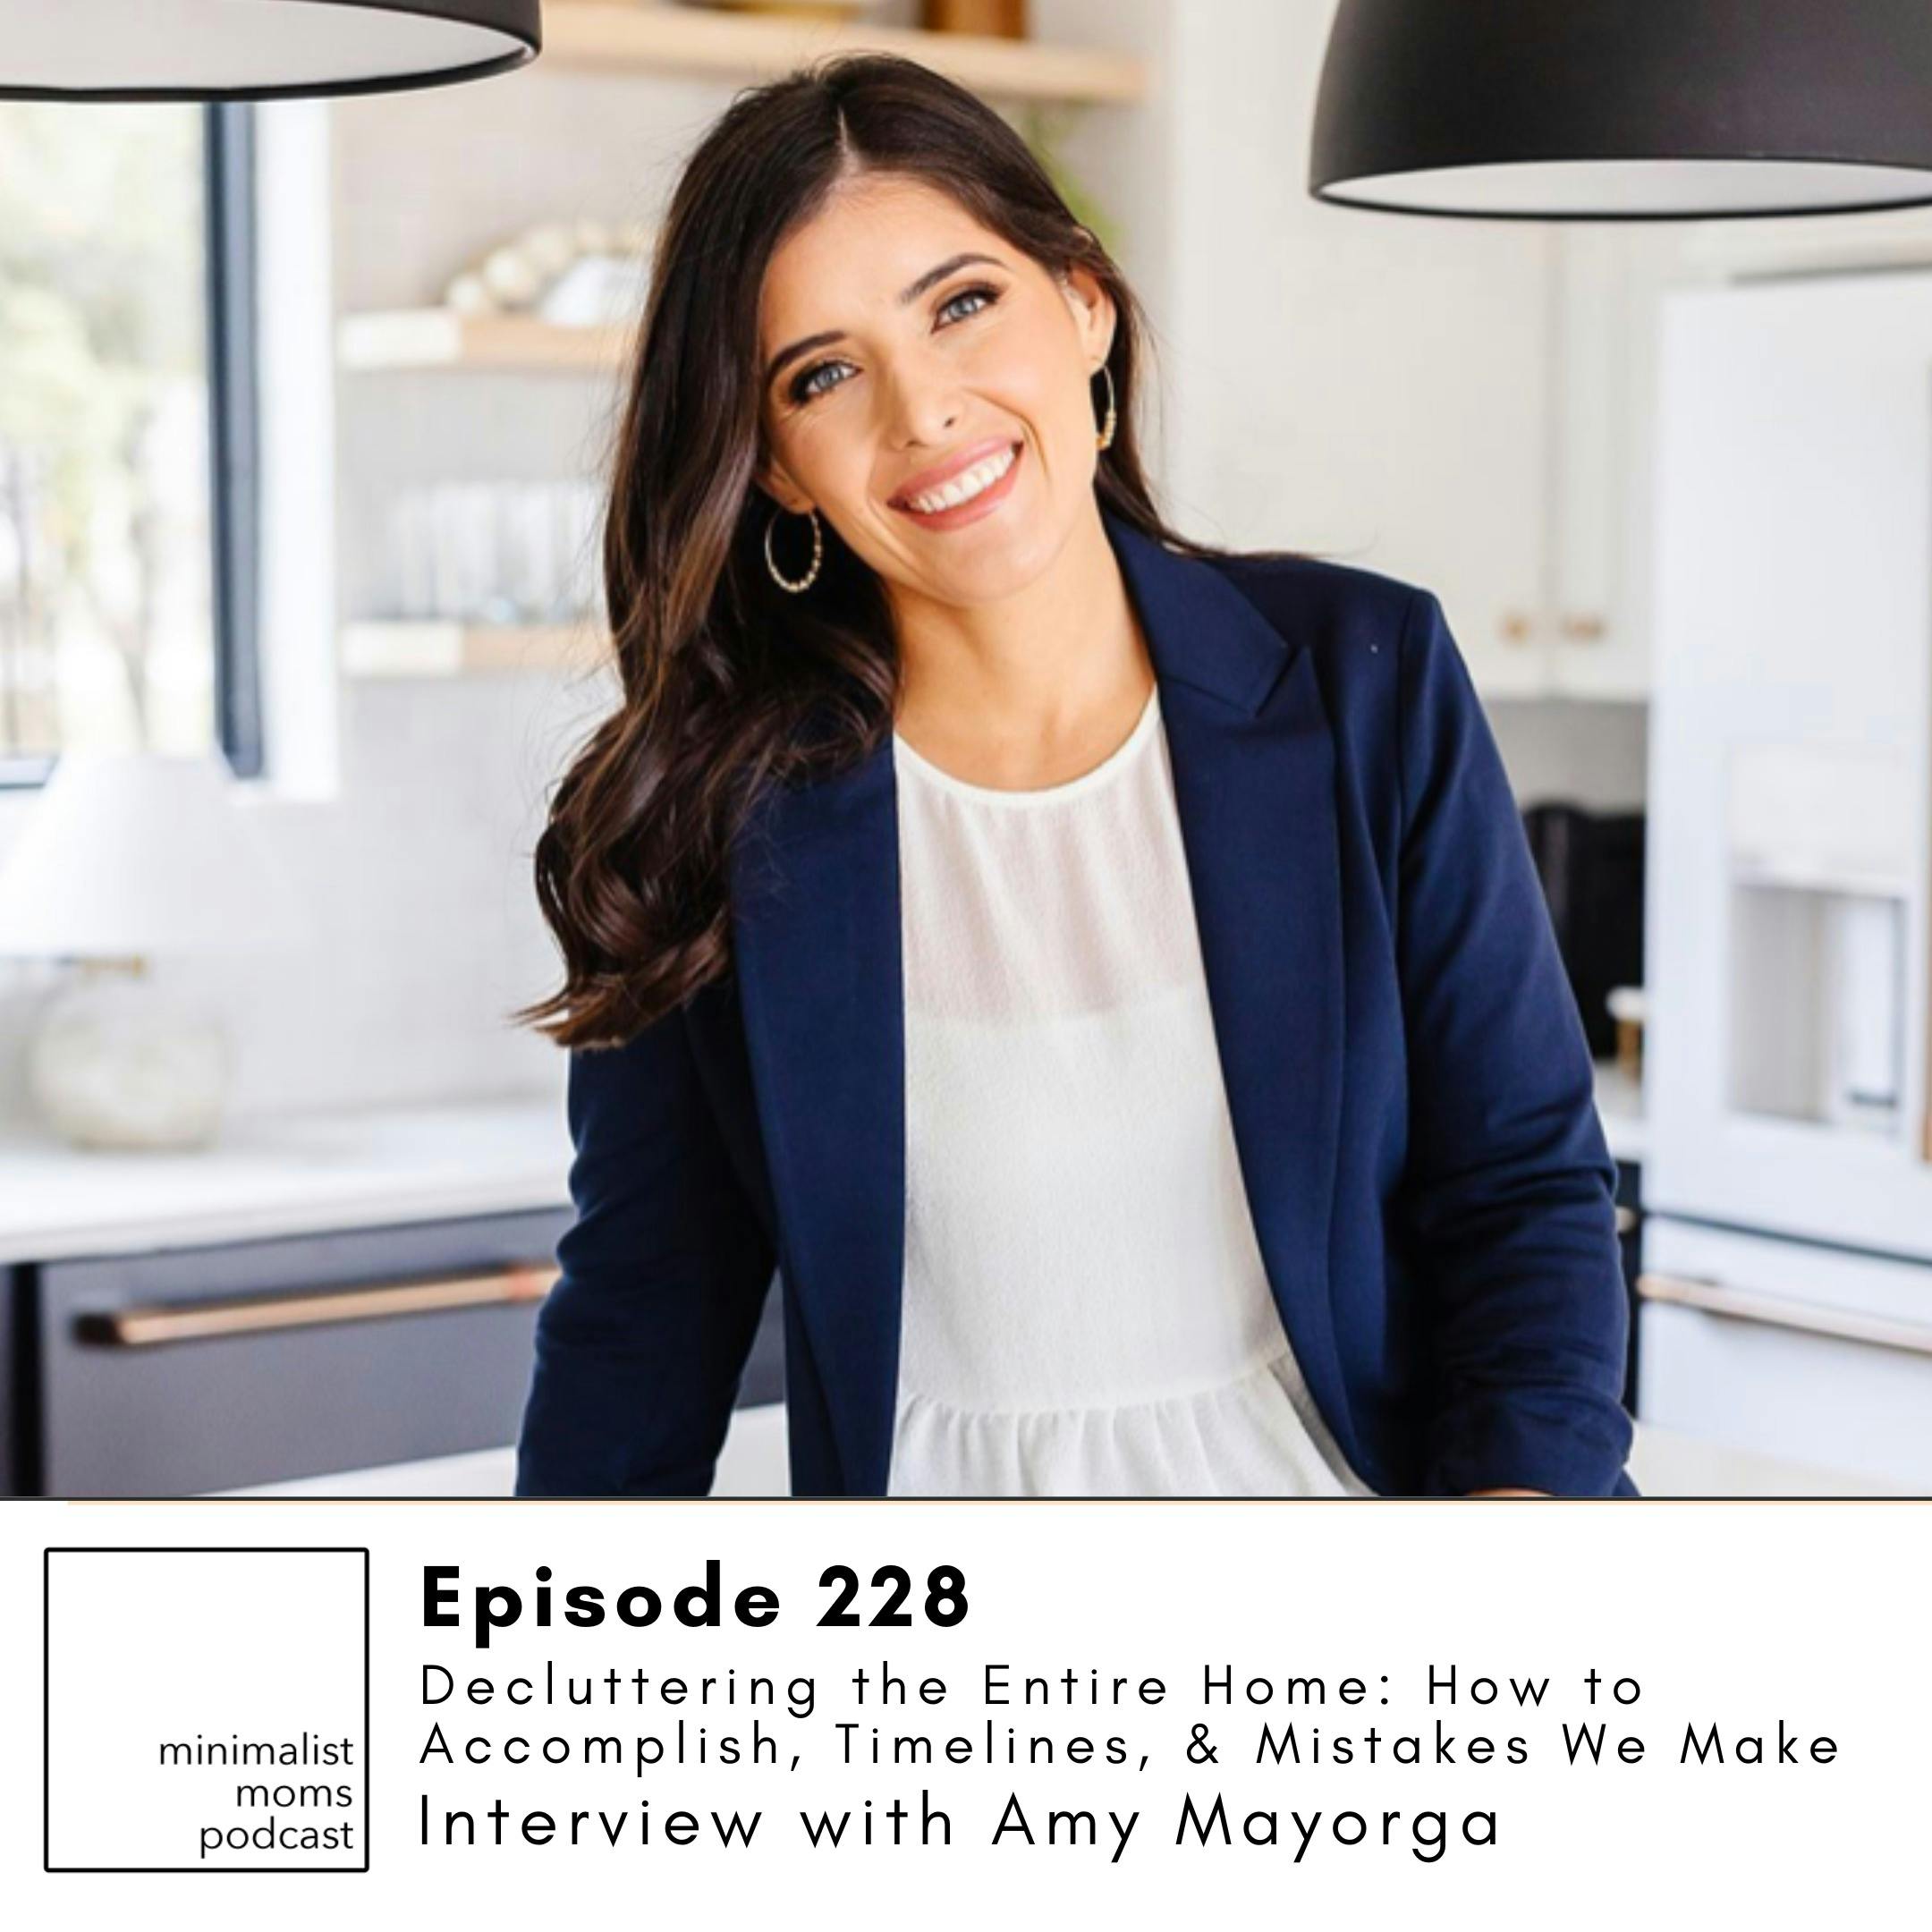 EP228: Decluttering the Entire Home: How to Accomplish, Timelines, & Mistakes We Make with Amy Mayorga